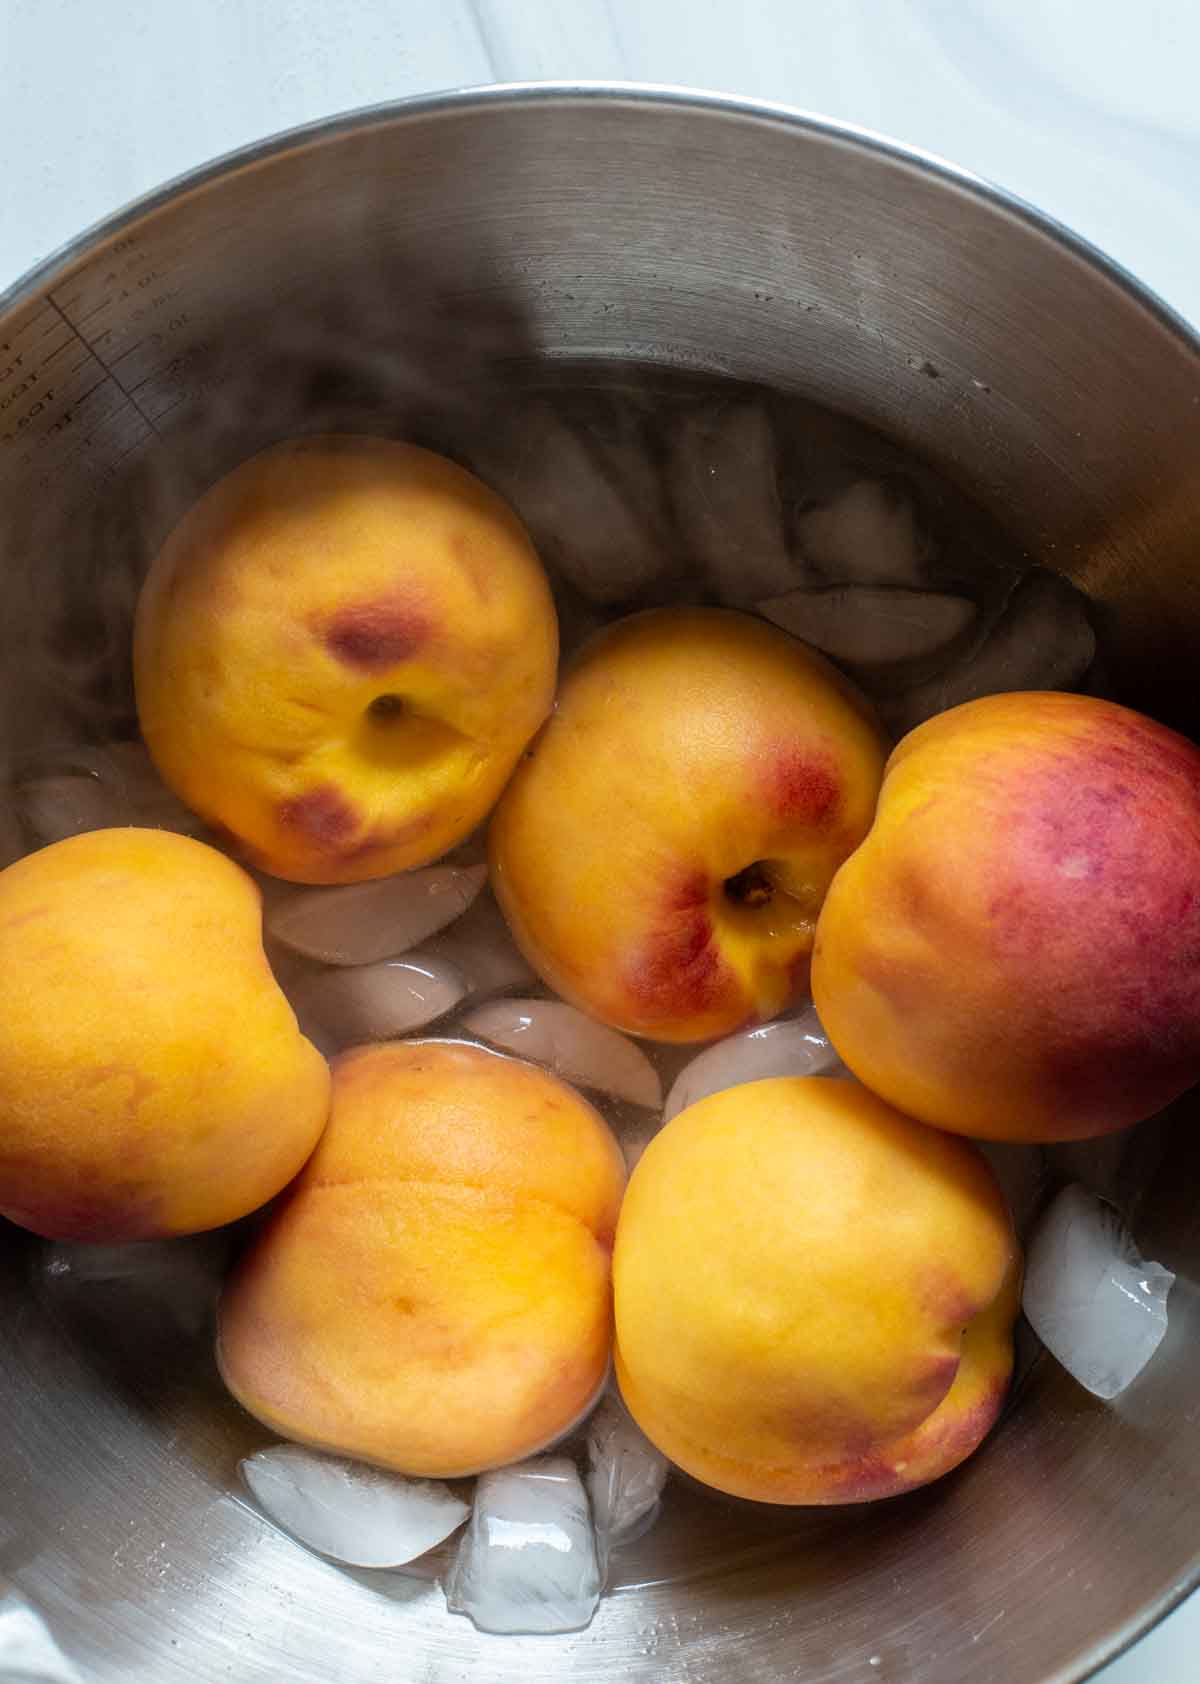 Blanched peaches in an ice bath.